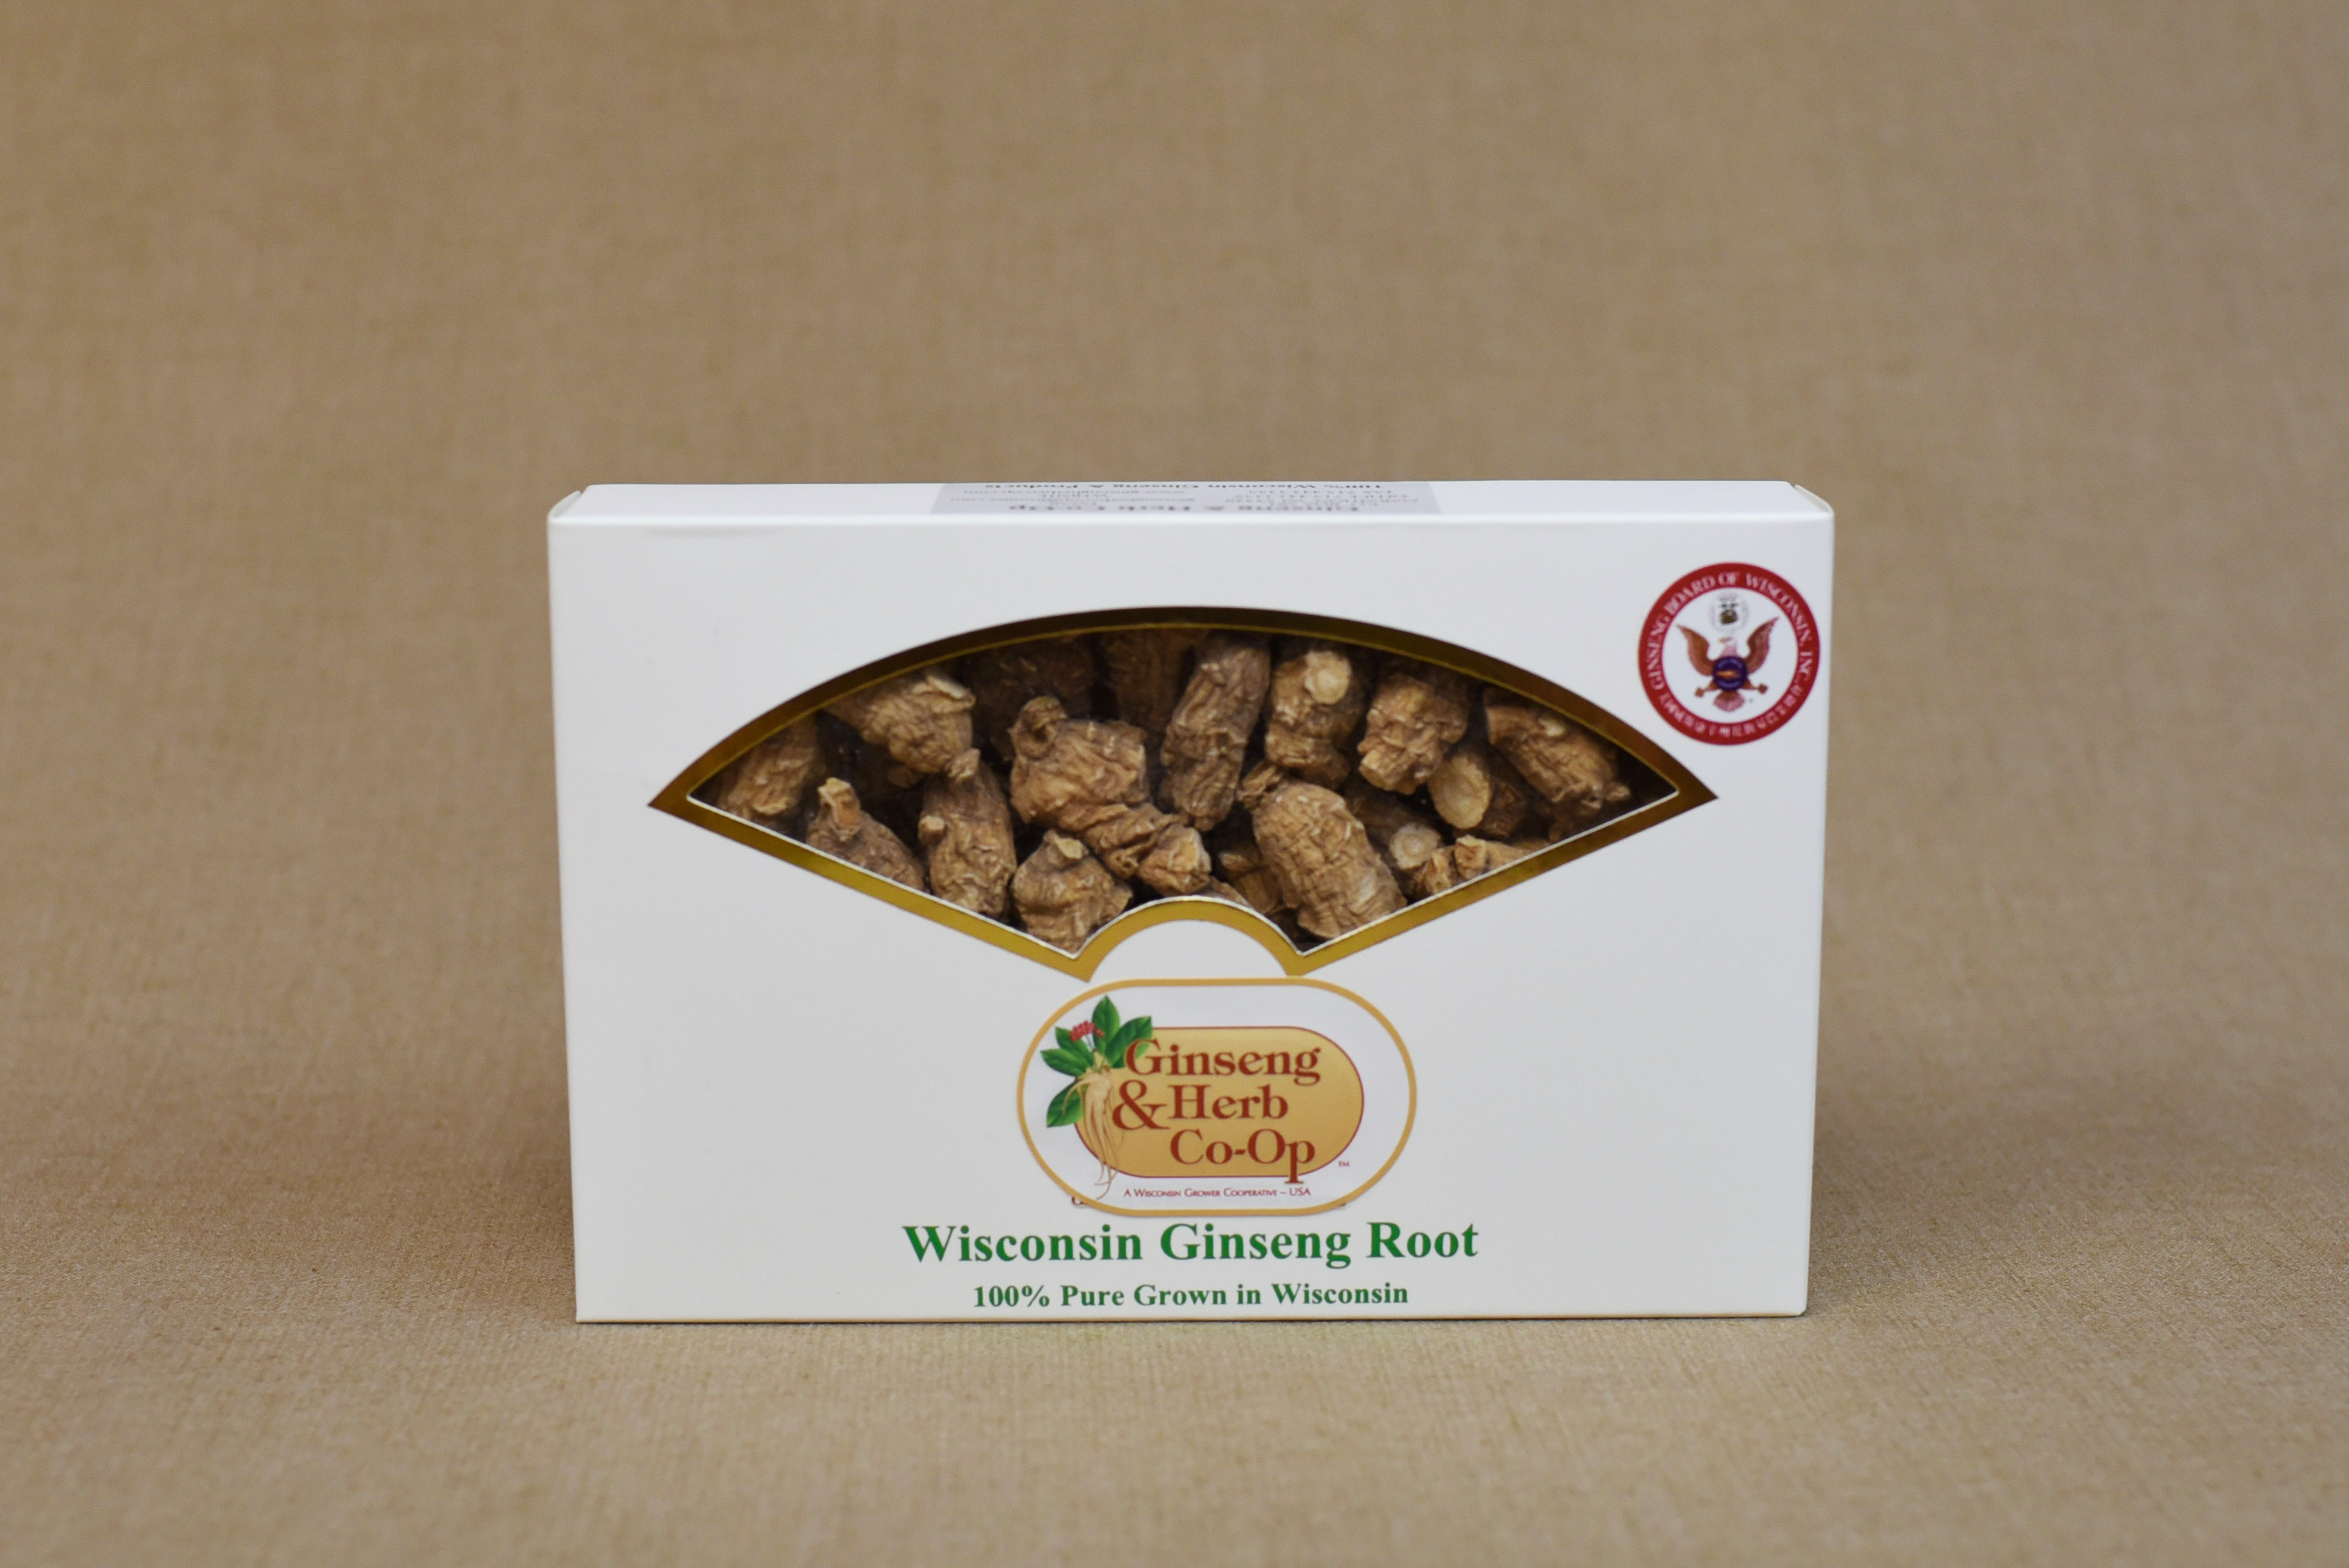 Buy Now! high quality Wisconsin Ginseng roots in Racine, WI